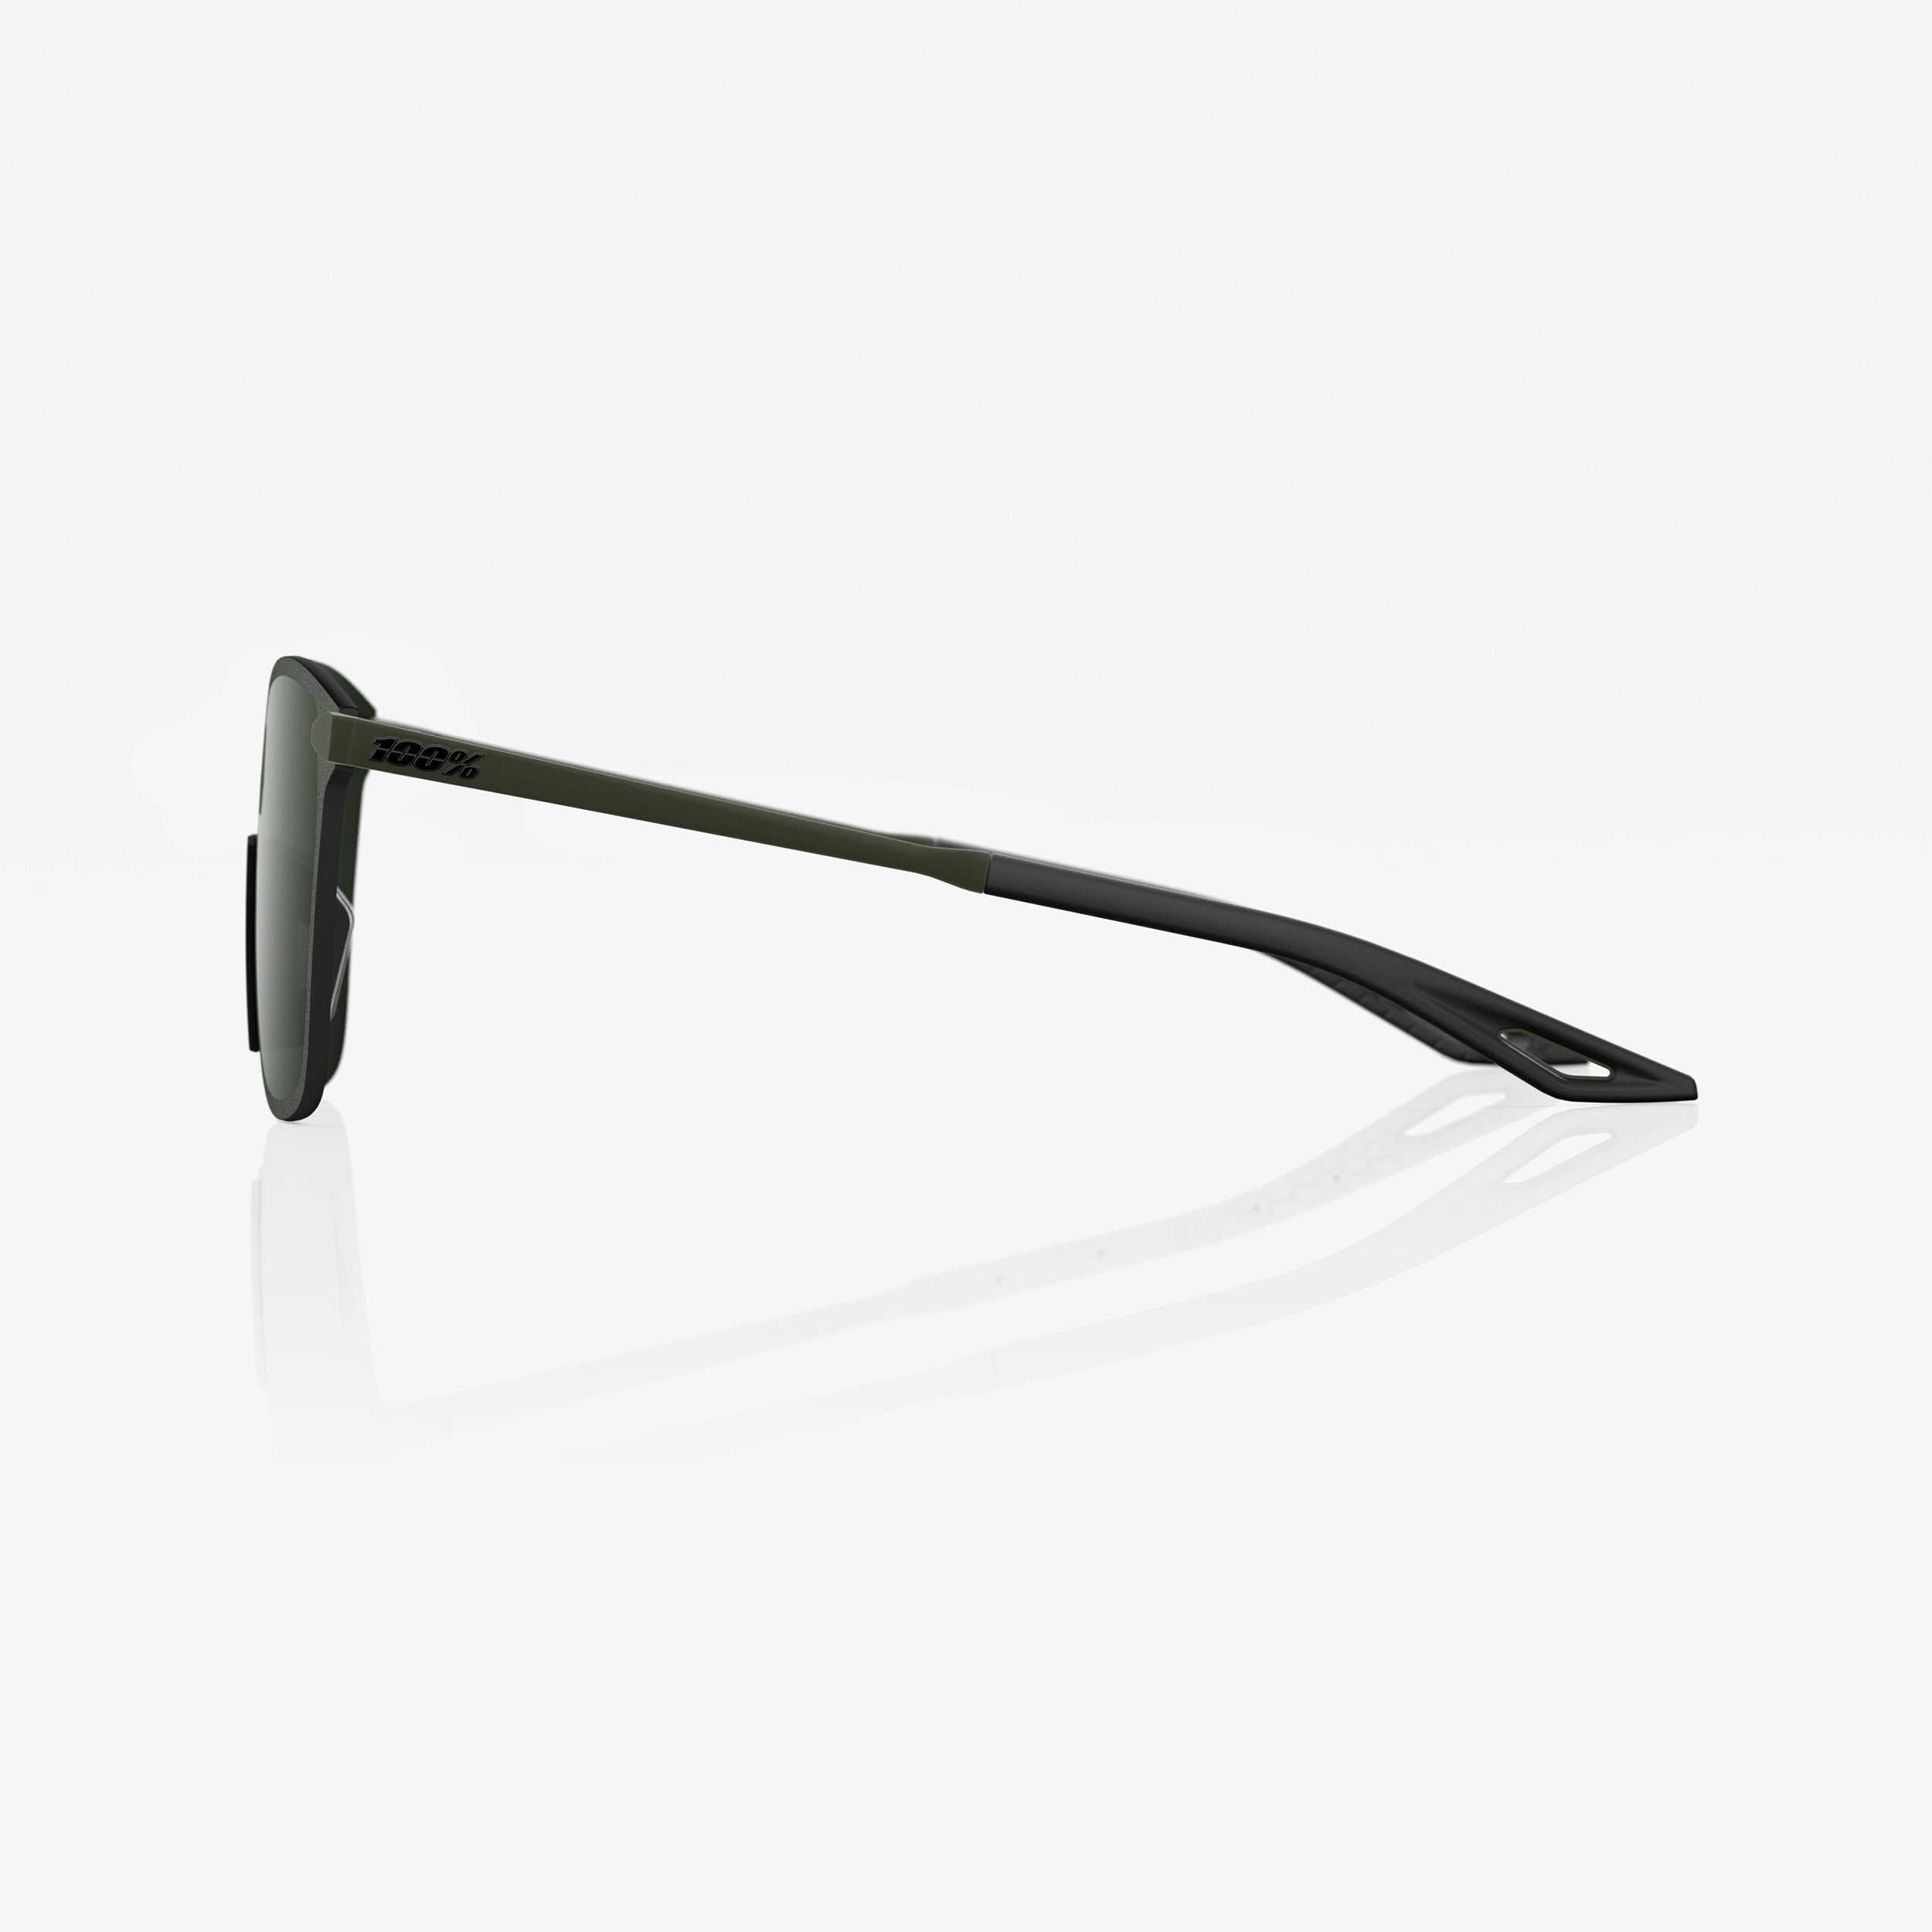 LEGERE® SQUARE Soft Tact Army Green - Grey Green Lens